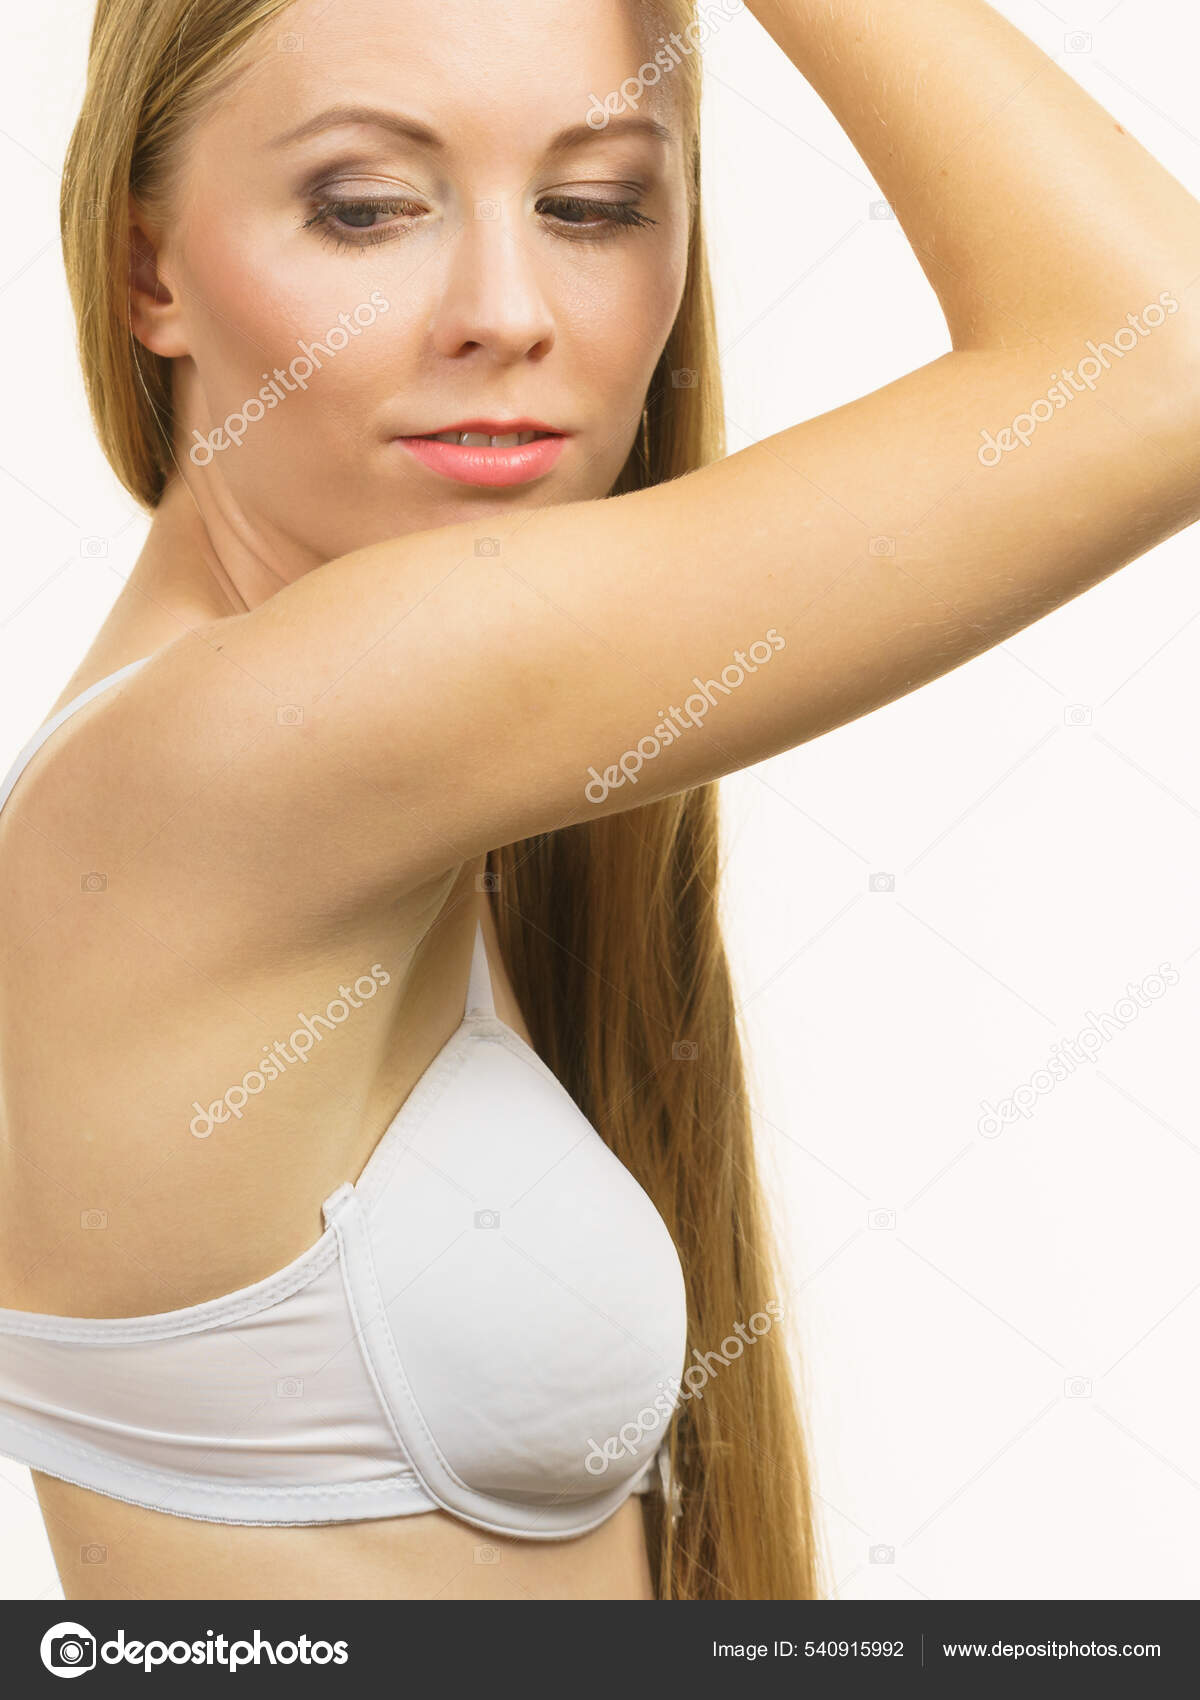 Young Long Hair Blonde Woman Small Boobs Wearing Bra Female Stock Photo by  ©Voyagerix 540915992